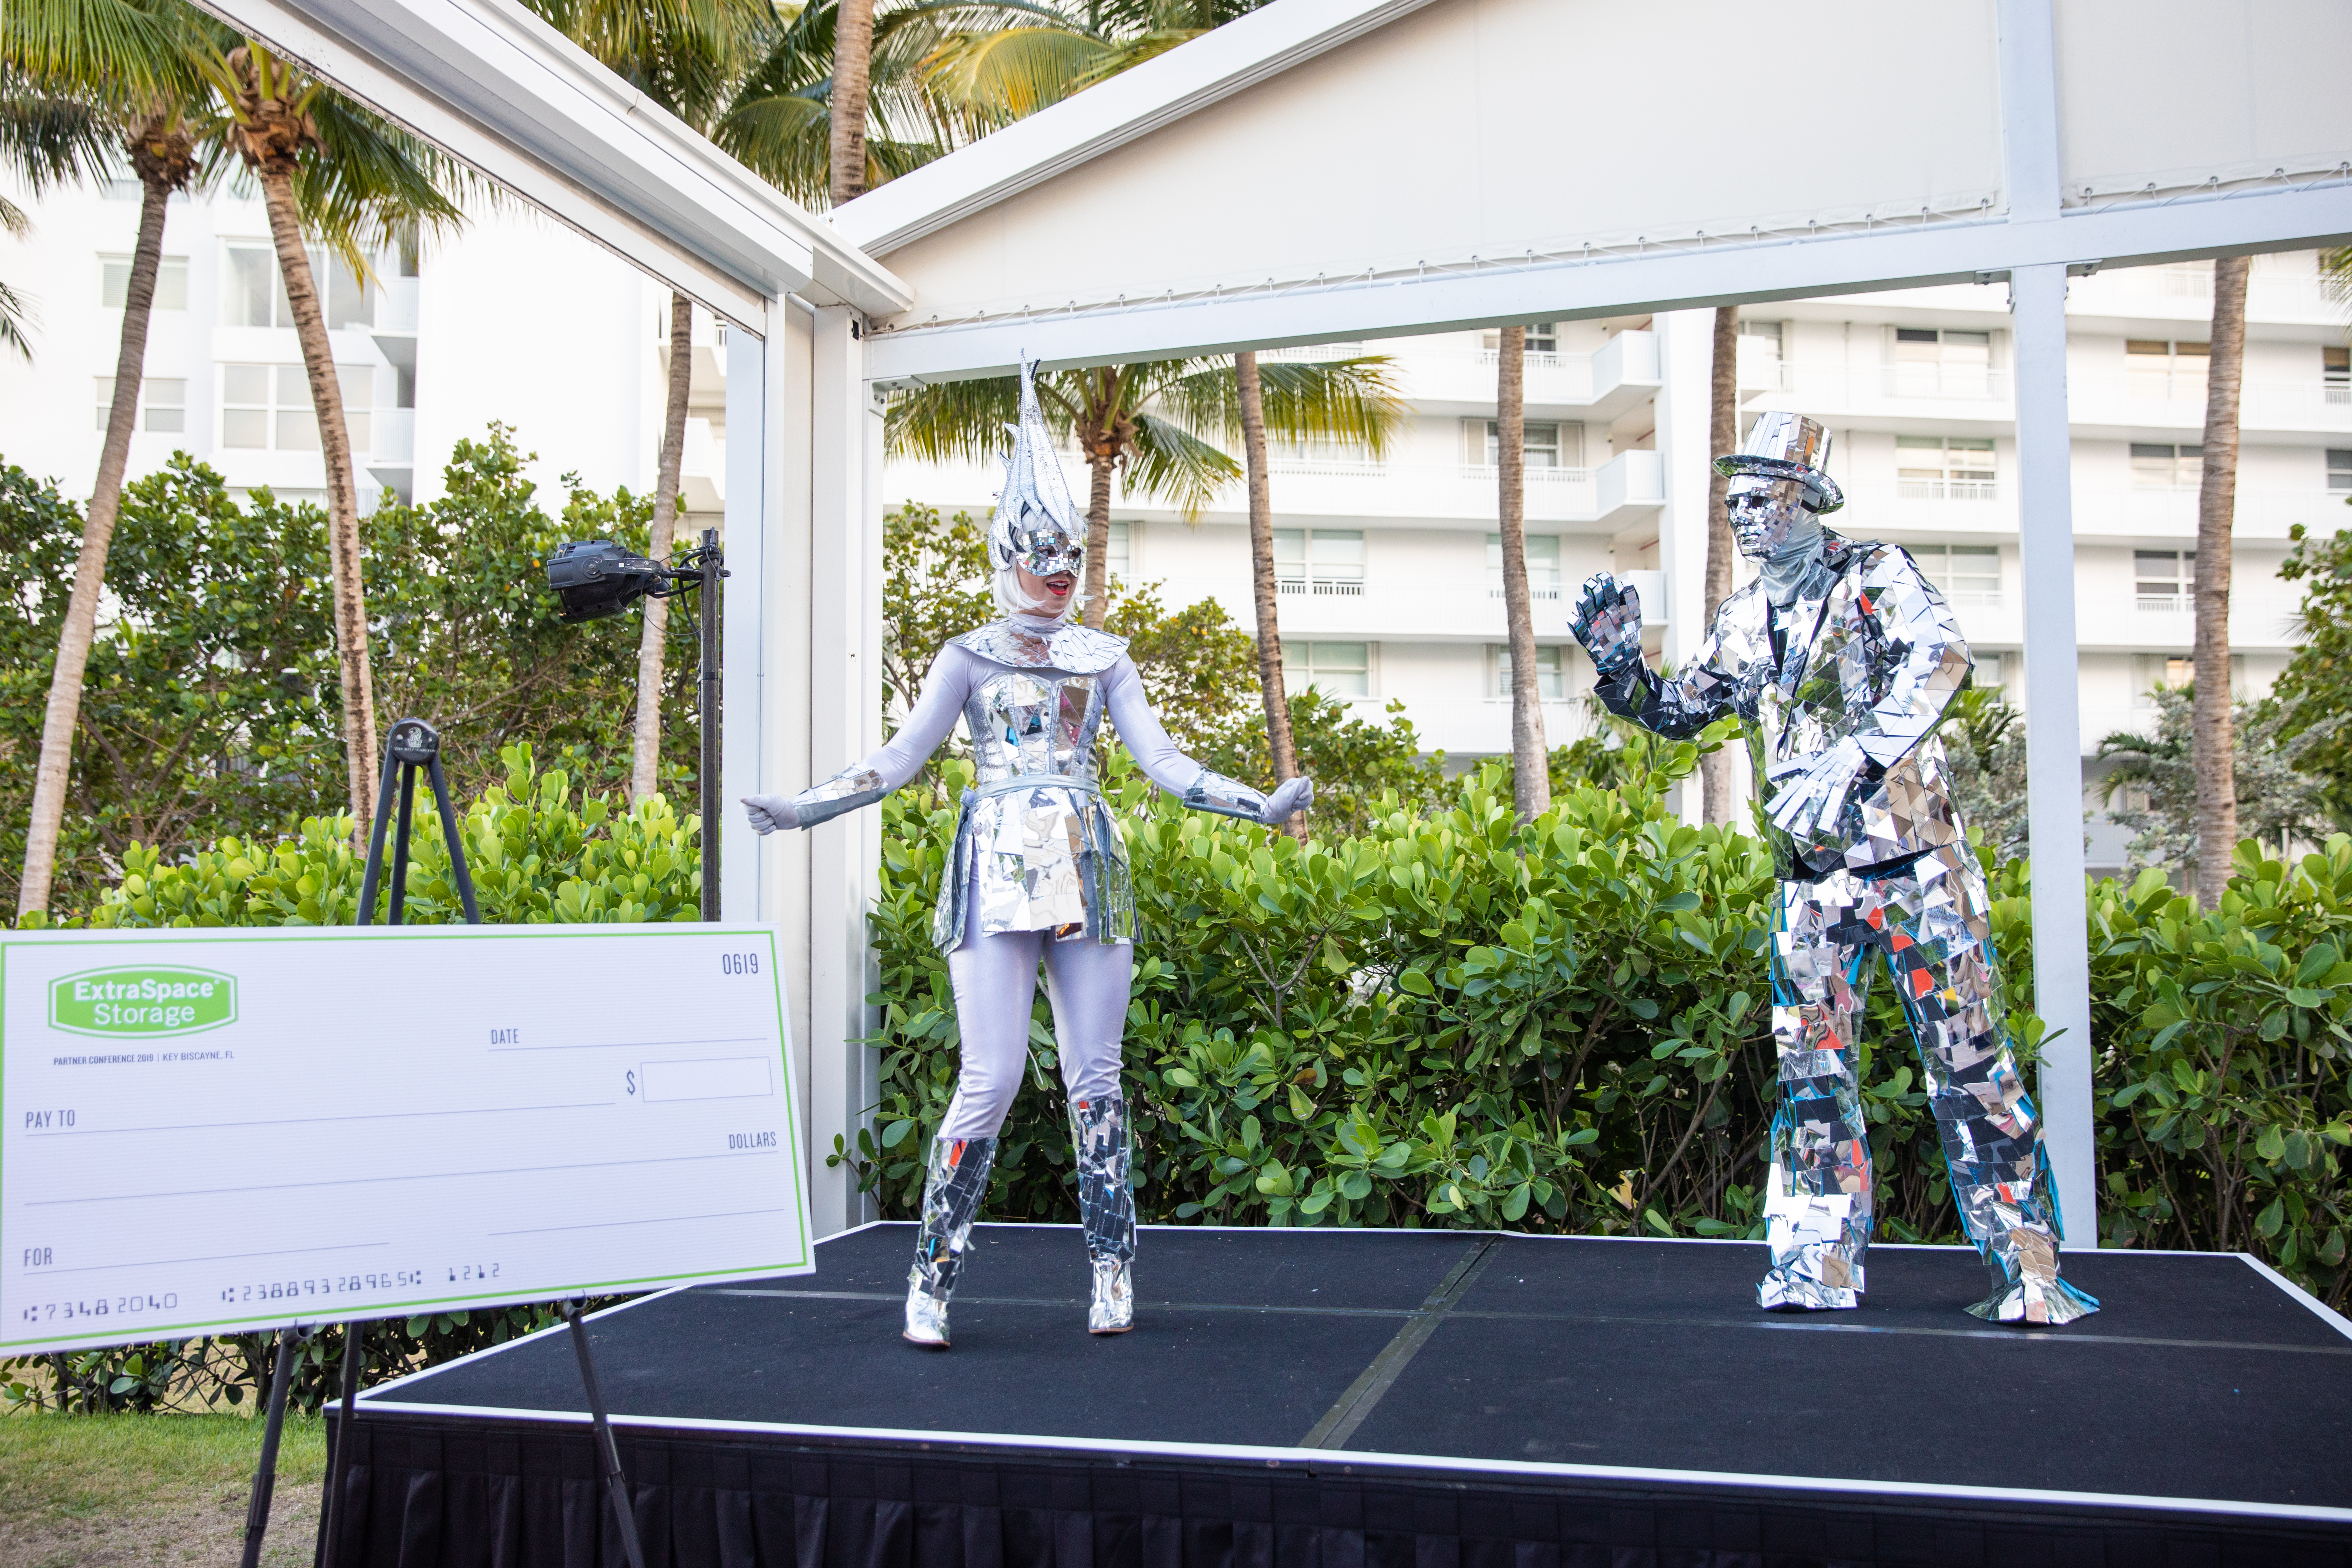 Costume contest during the 2019 Partner Conference for Extra Space Storage